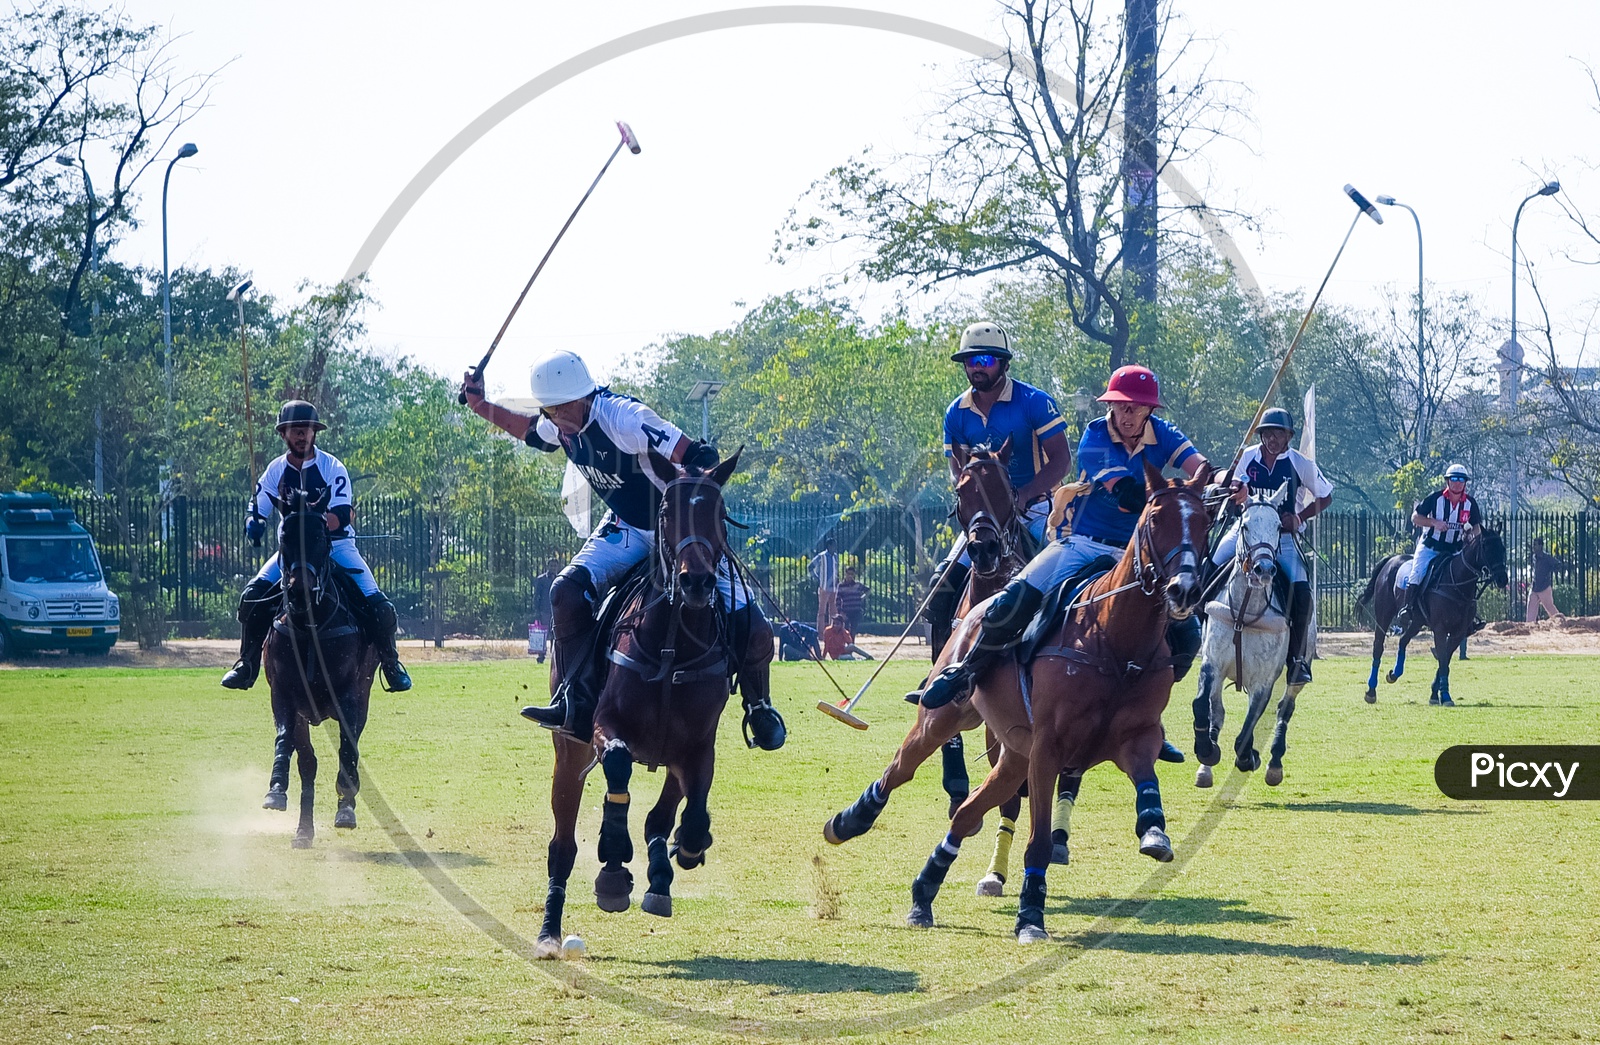 Players in action at a Polo Match